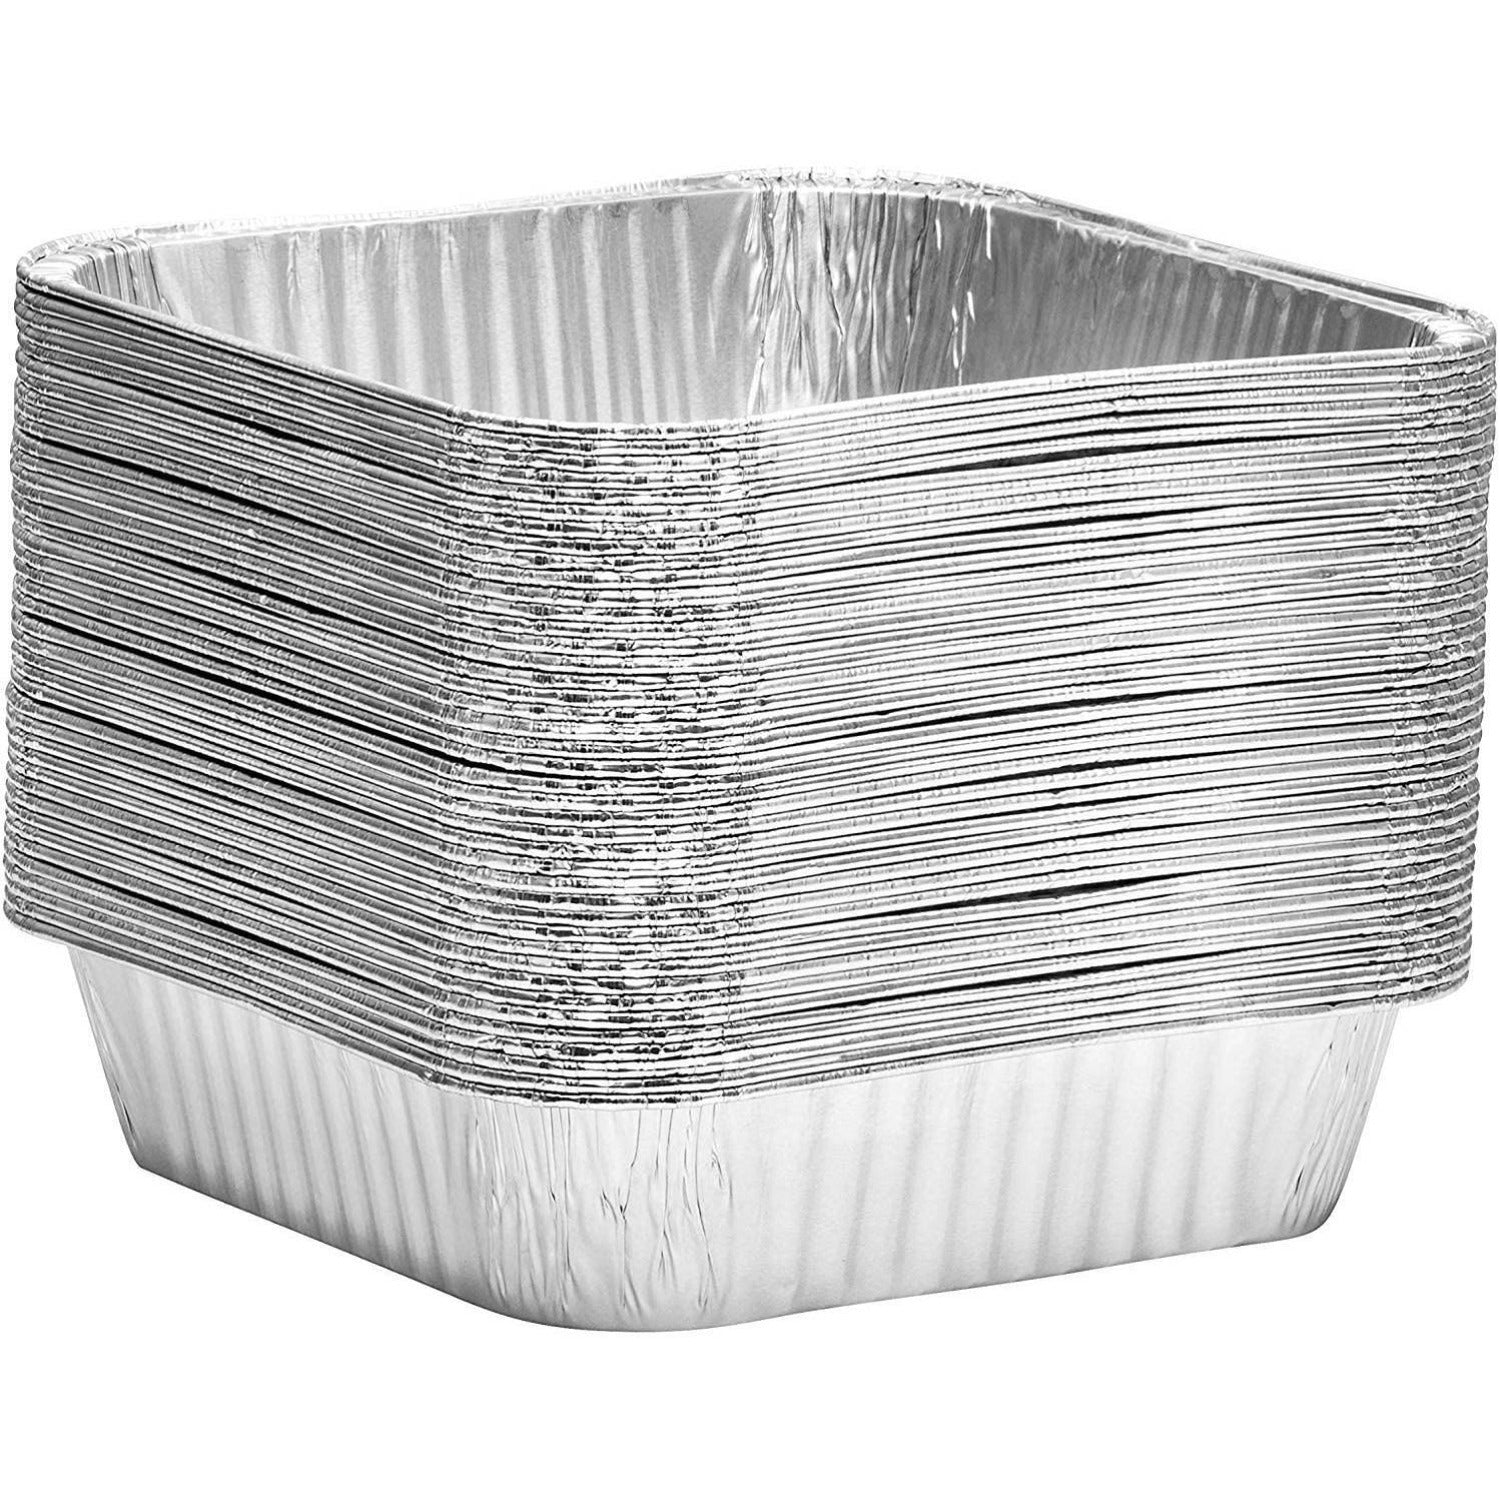 Square 9 Aluminum Pans (3 Count) - Blue Sky Trading